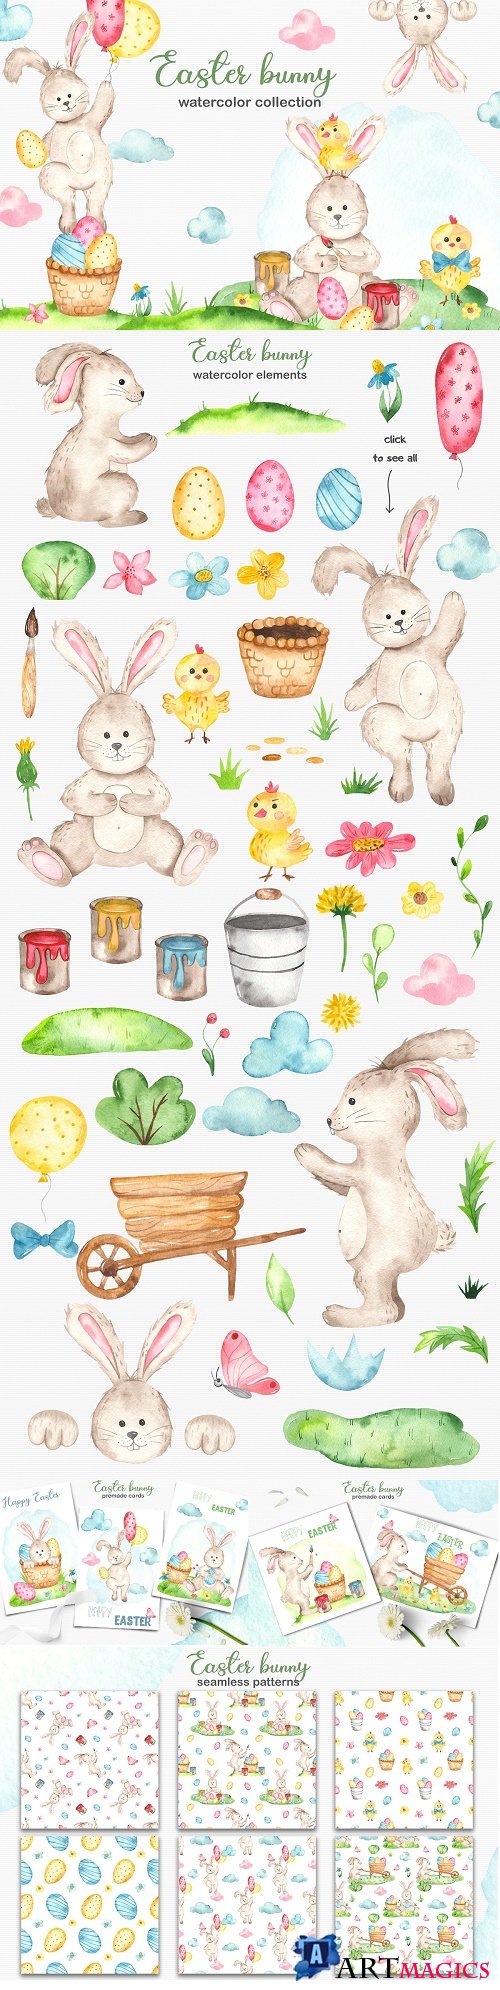 Easter Bunny watercolor collection - 4503009